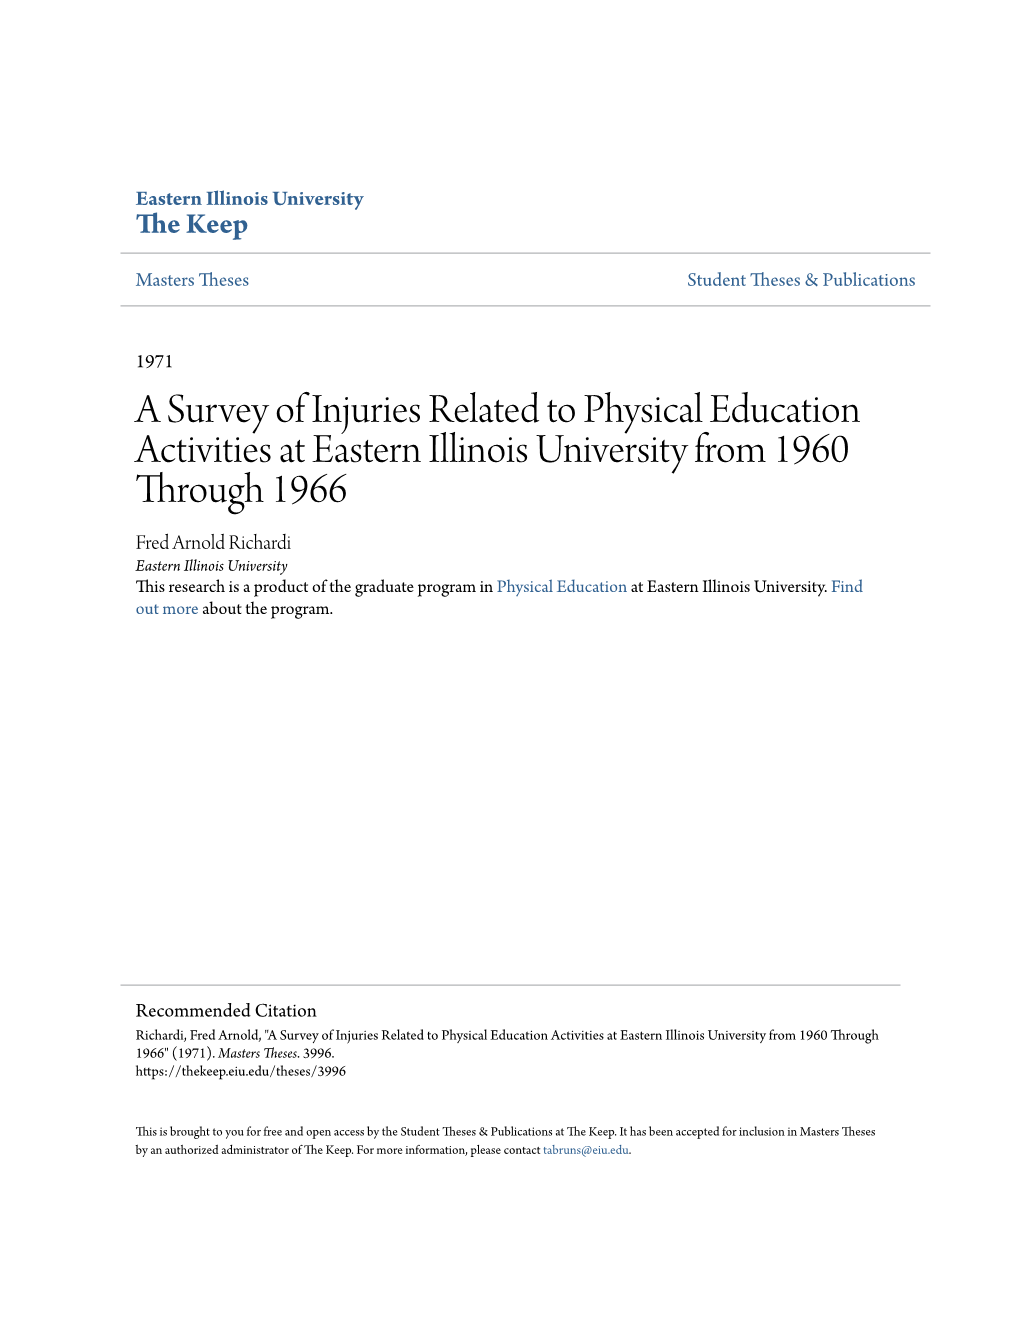 A Survey of Injuries Related to Physical Education Activities At